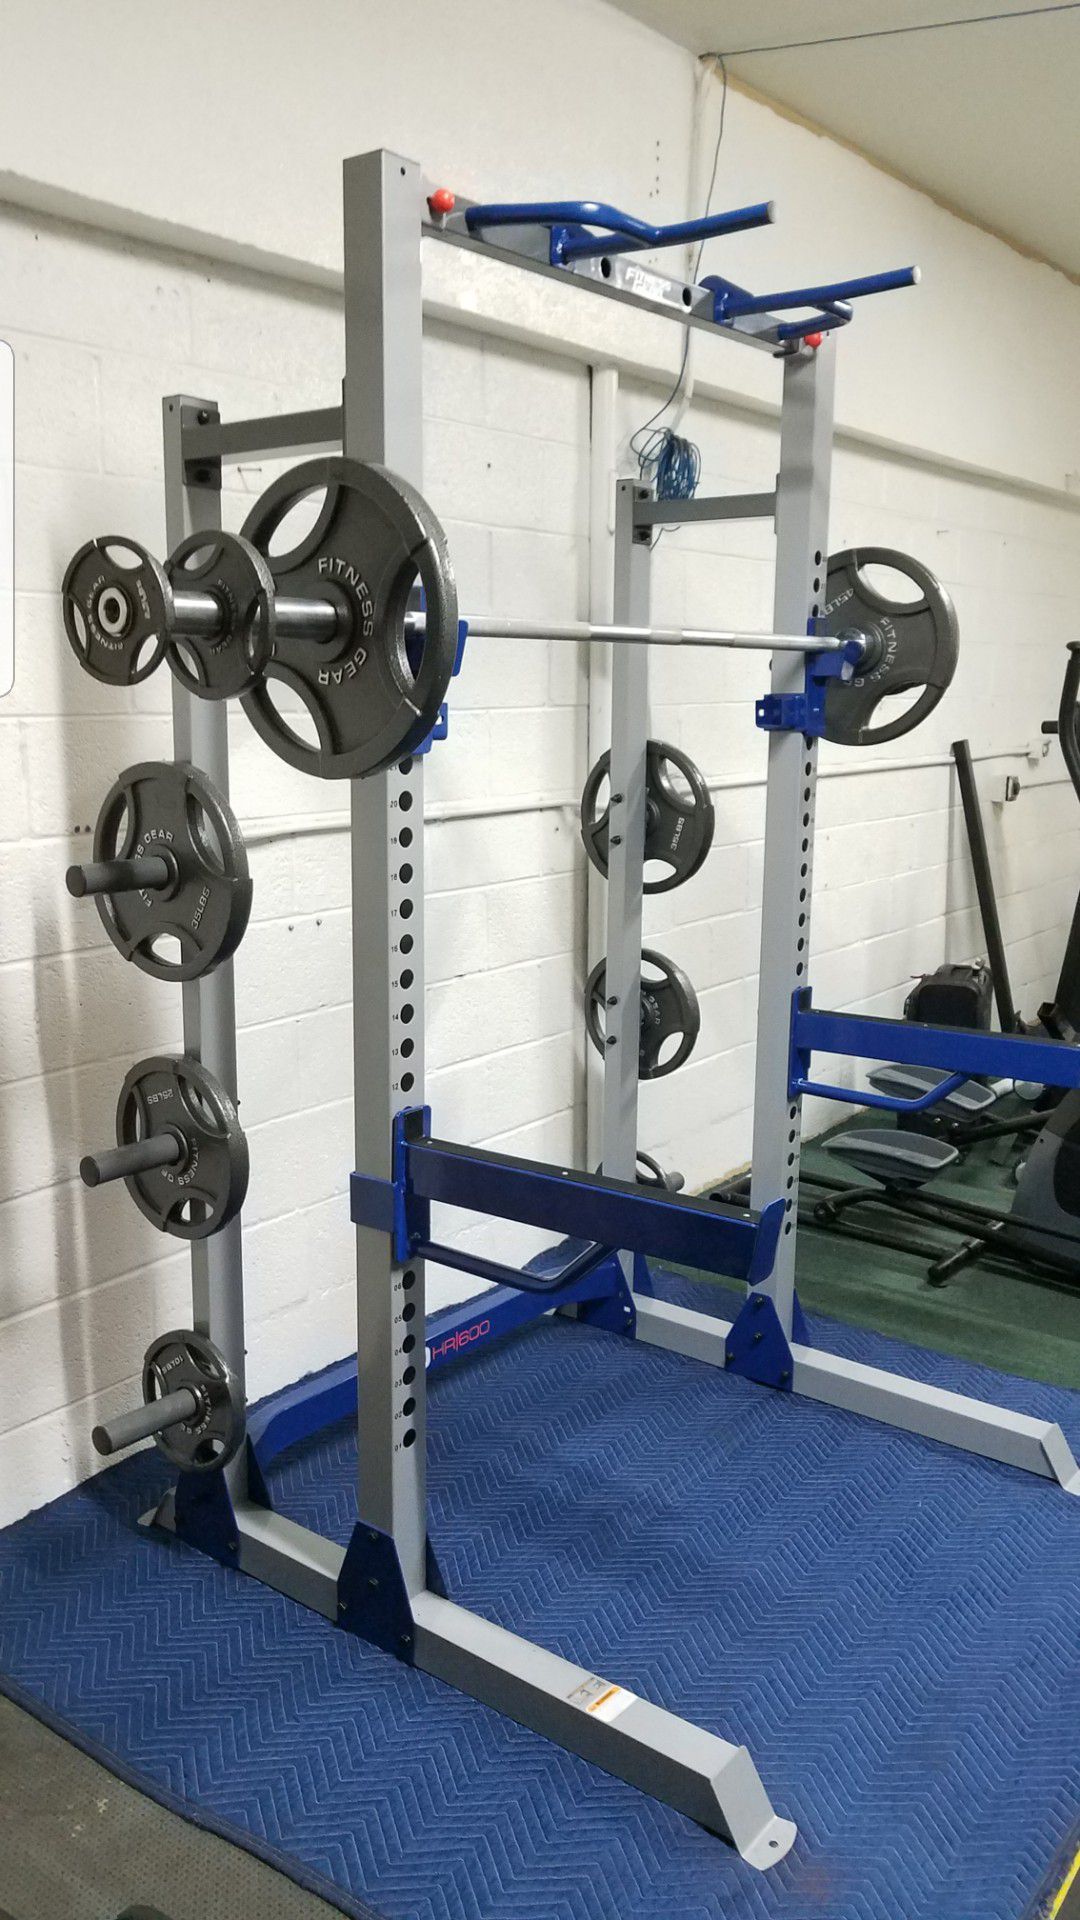 (EXERCISE FITNESS 365) HALF RACK/BENCH PRESS WITH PULL UP & DIP BAR, BARBELL AND FULL SET OF OLYMPIC WEIGHTS WITH EASY GRIP HANDLES